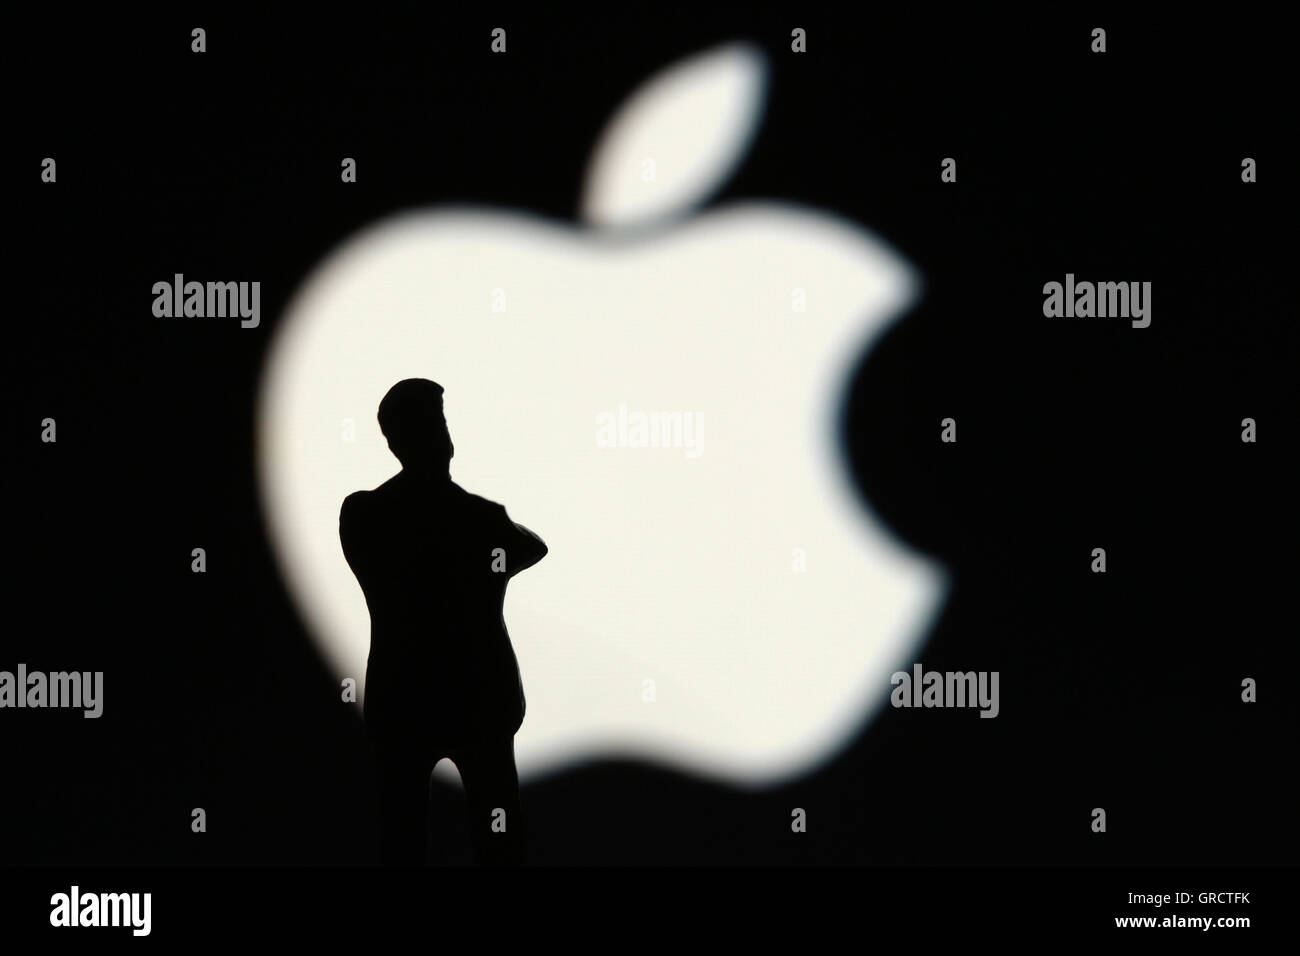 Apple Sign With Miniature Figure Stock Photo